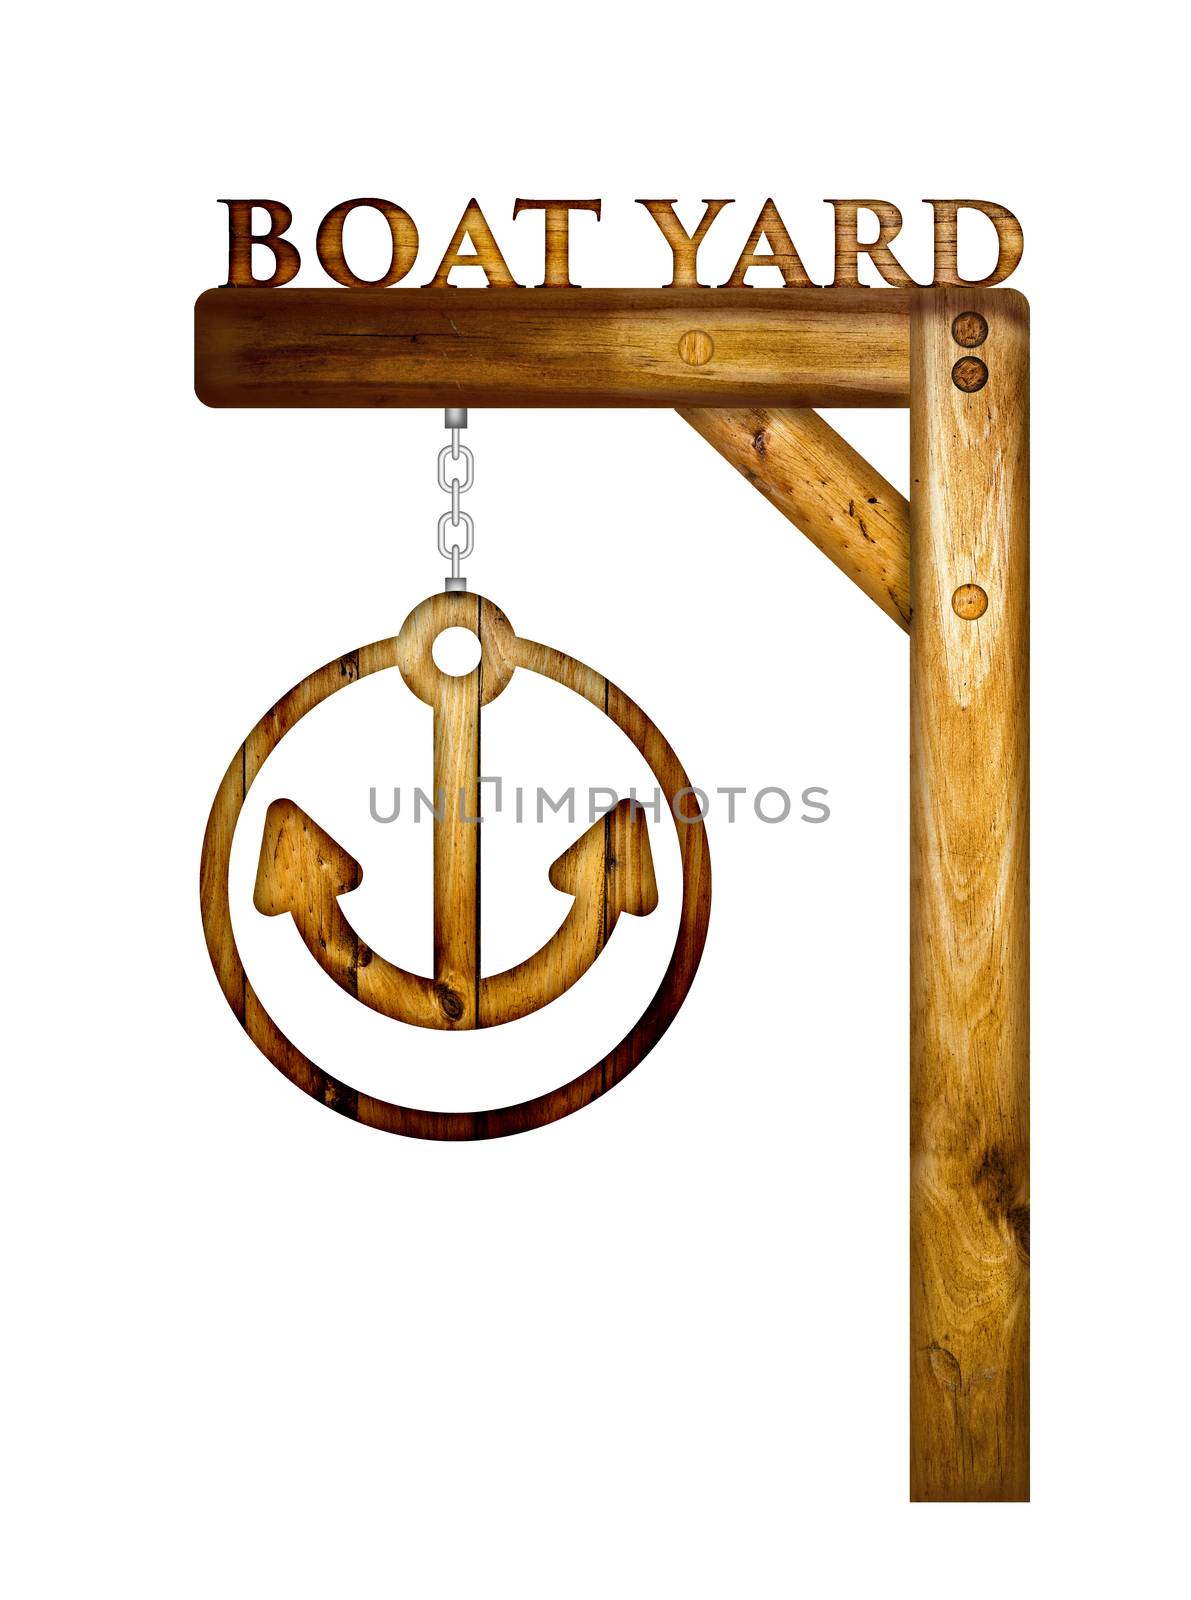 Wooden boat yard sign over a white background.